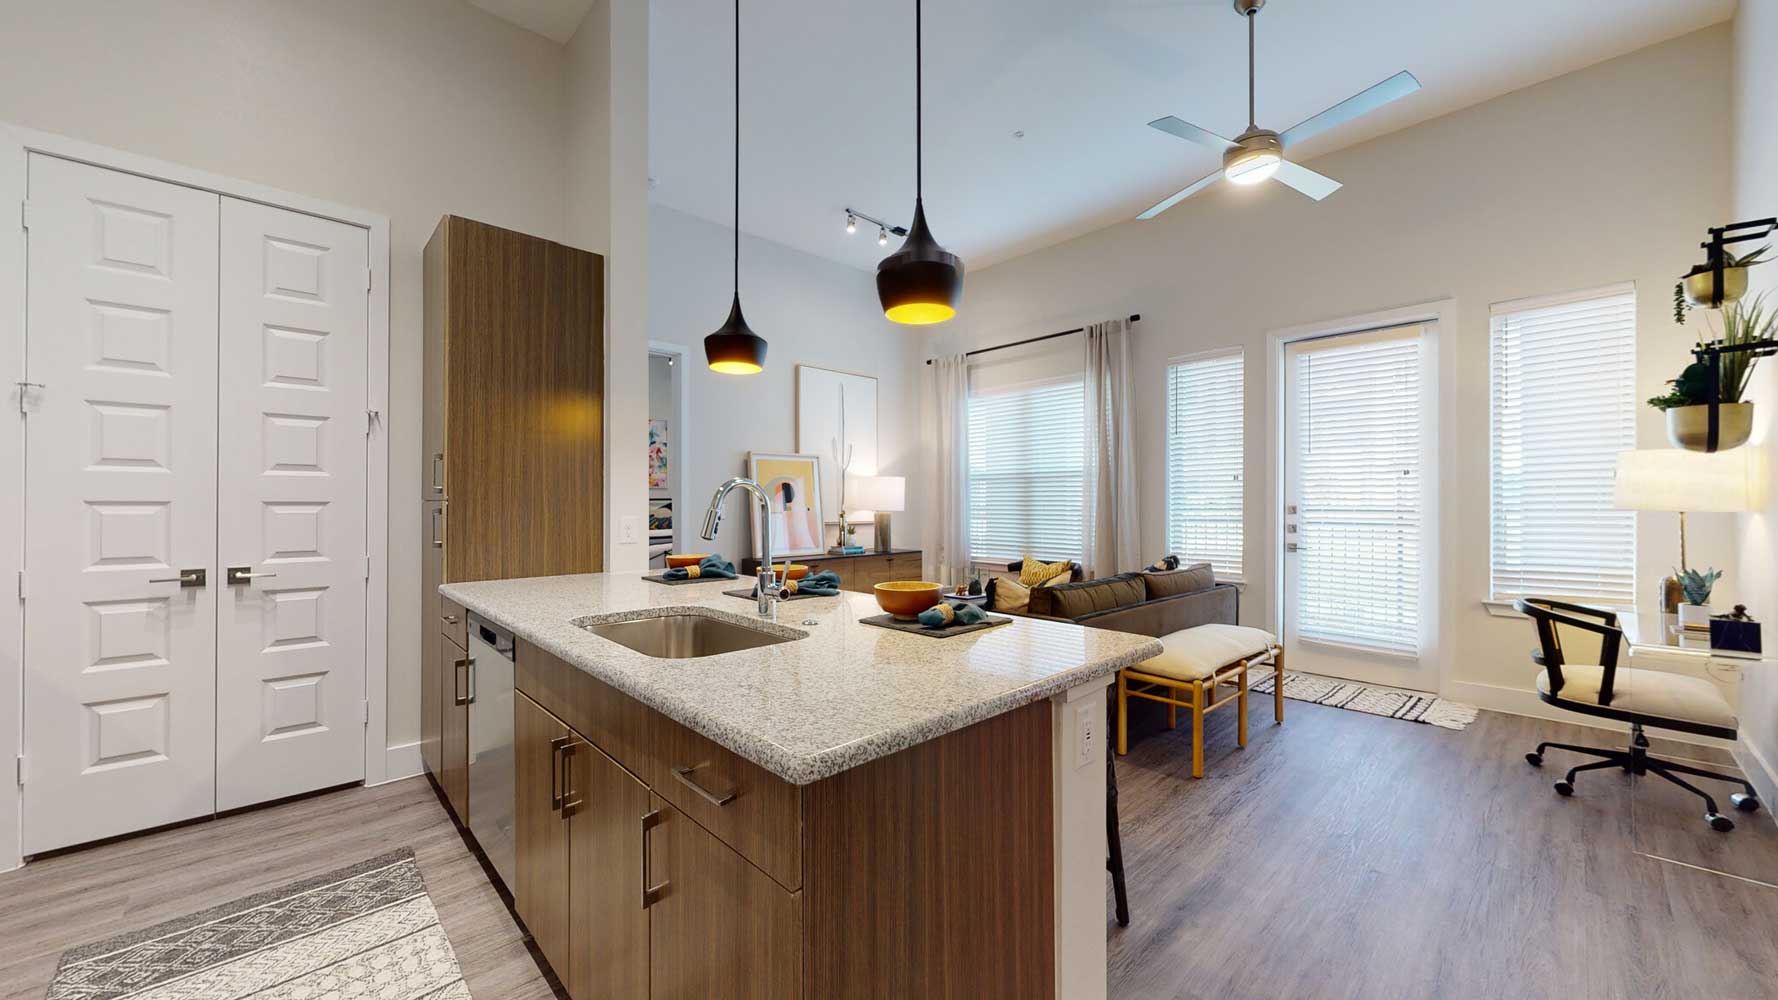 Kitchen with Pendant Lighting at The Truman Arlington Commons